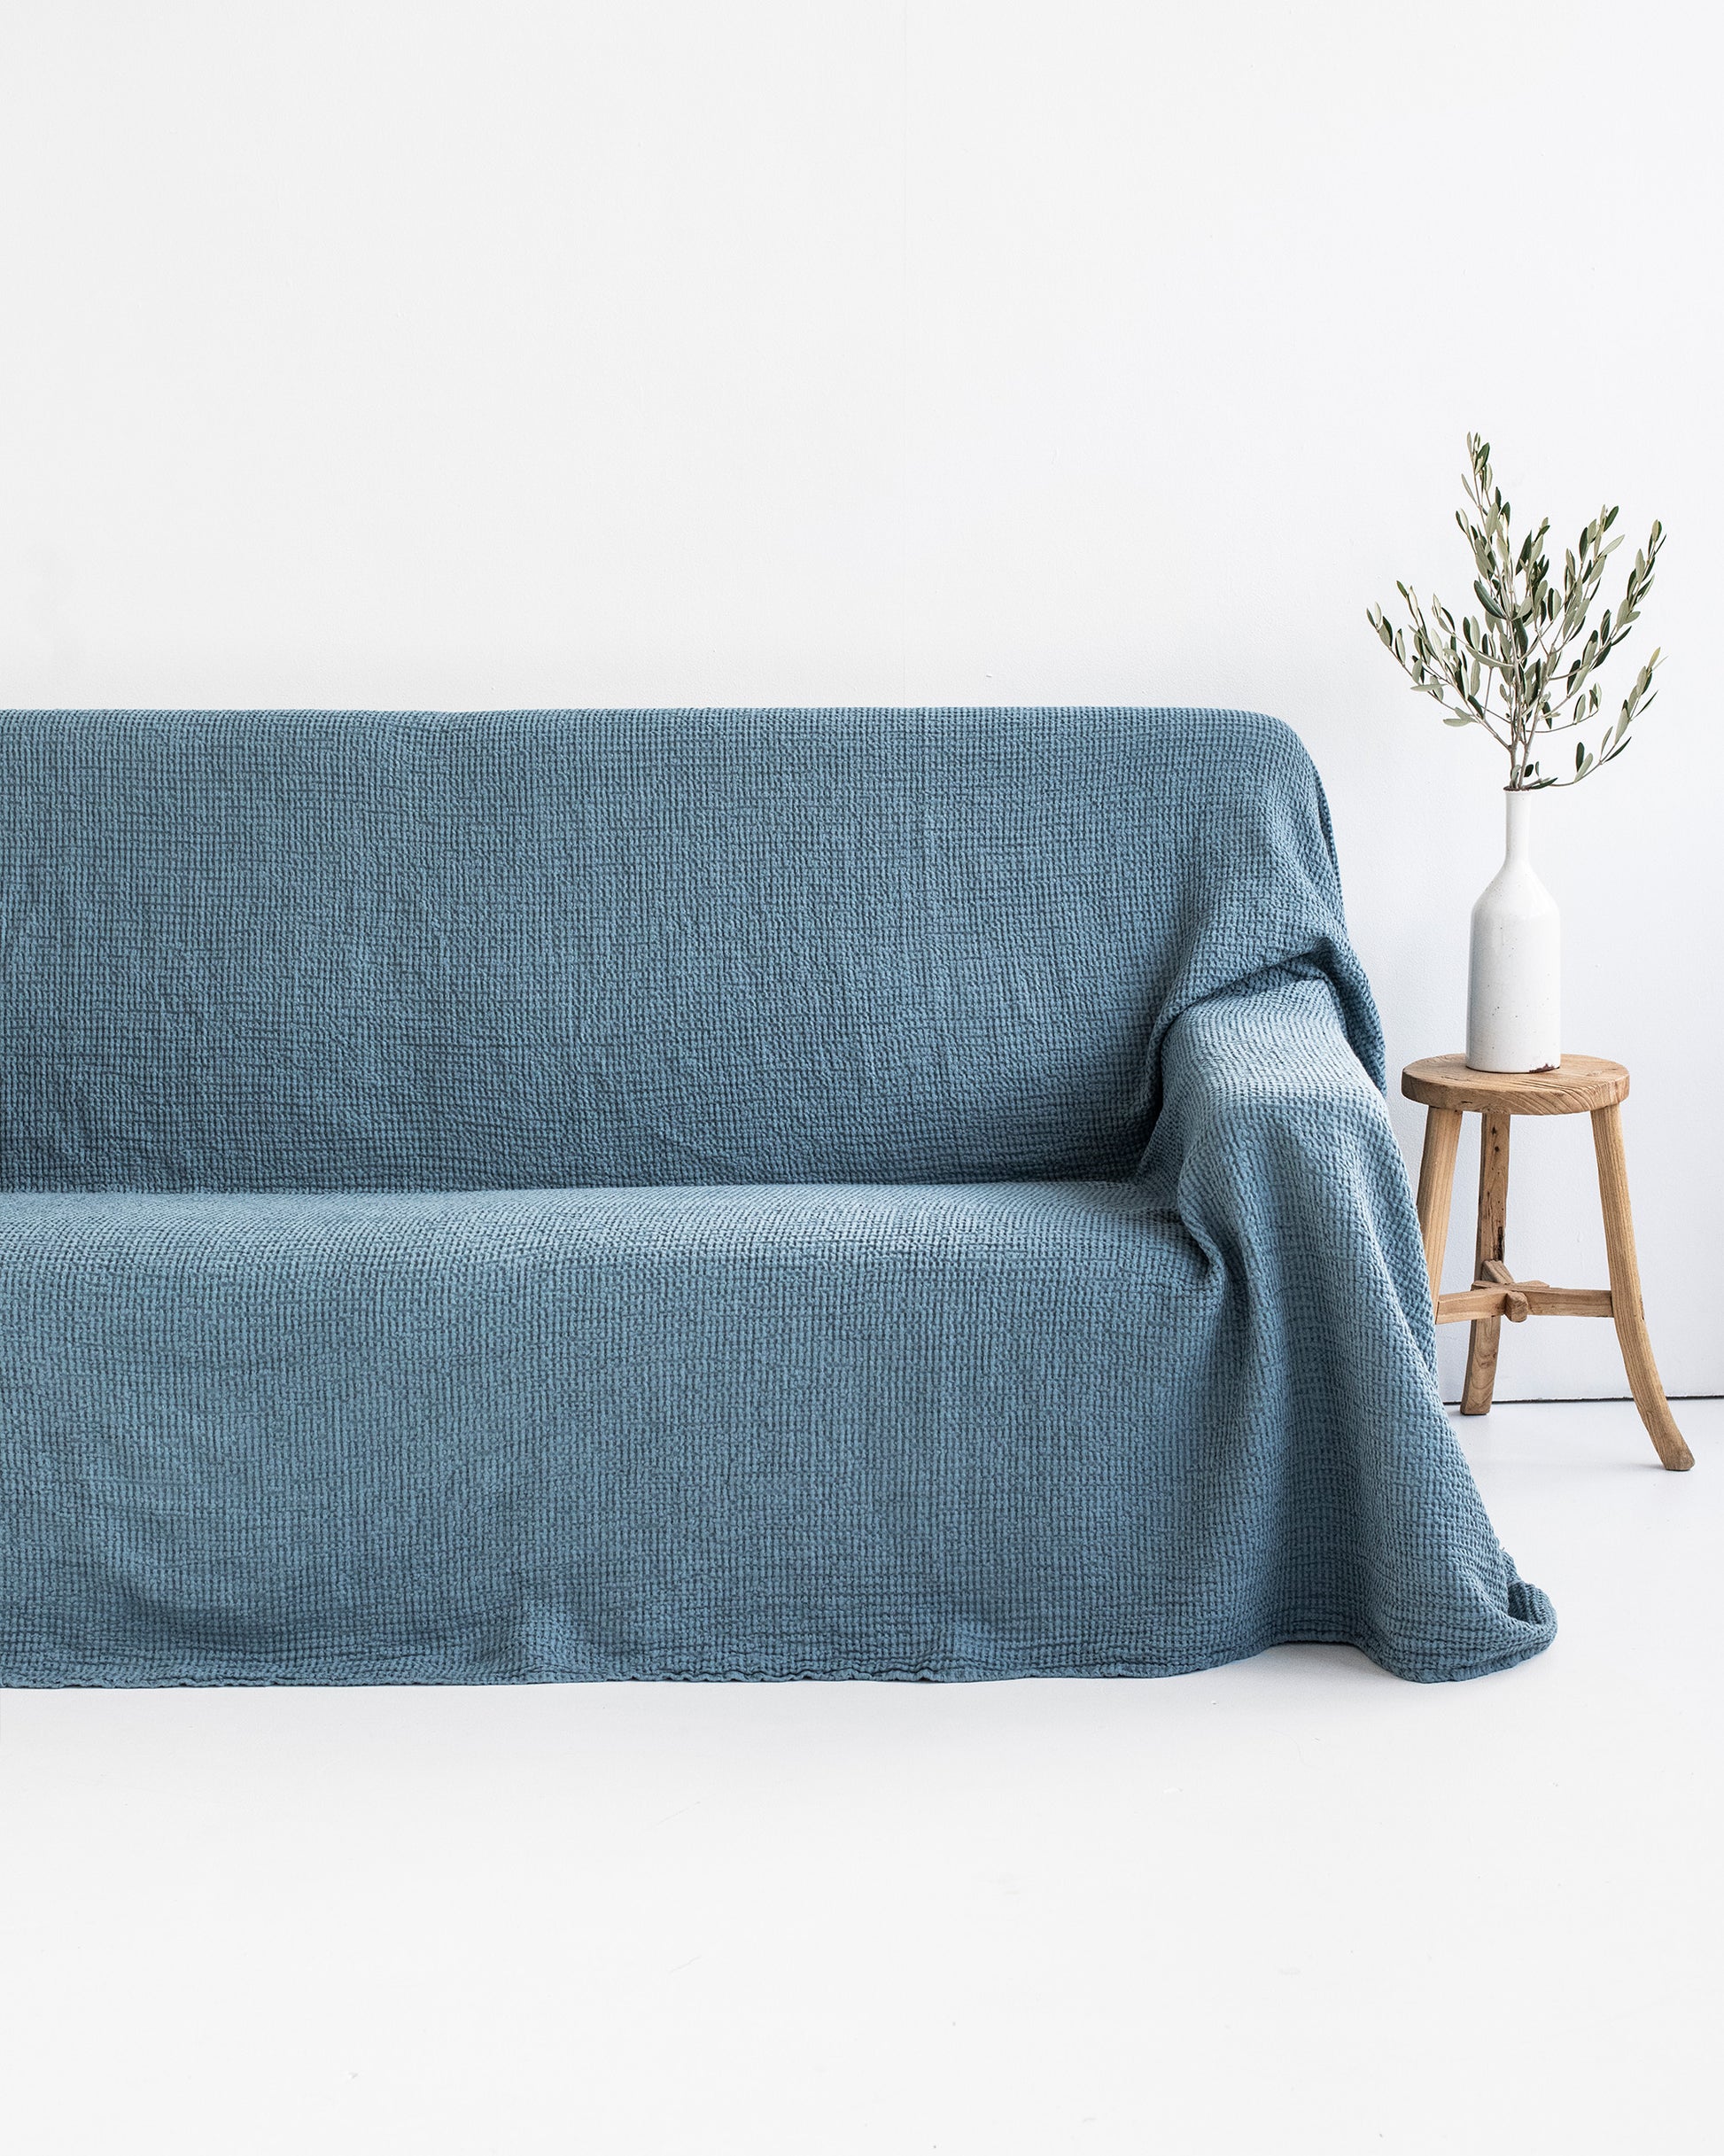 Waffle linen couch cover in Gray blue - MagicLinen